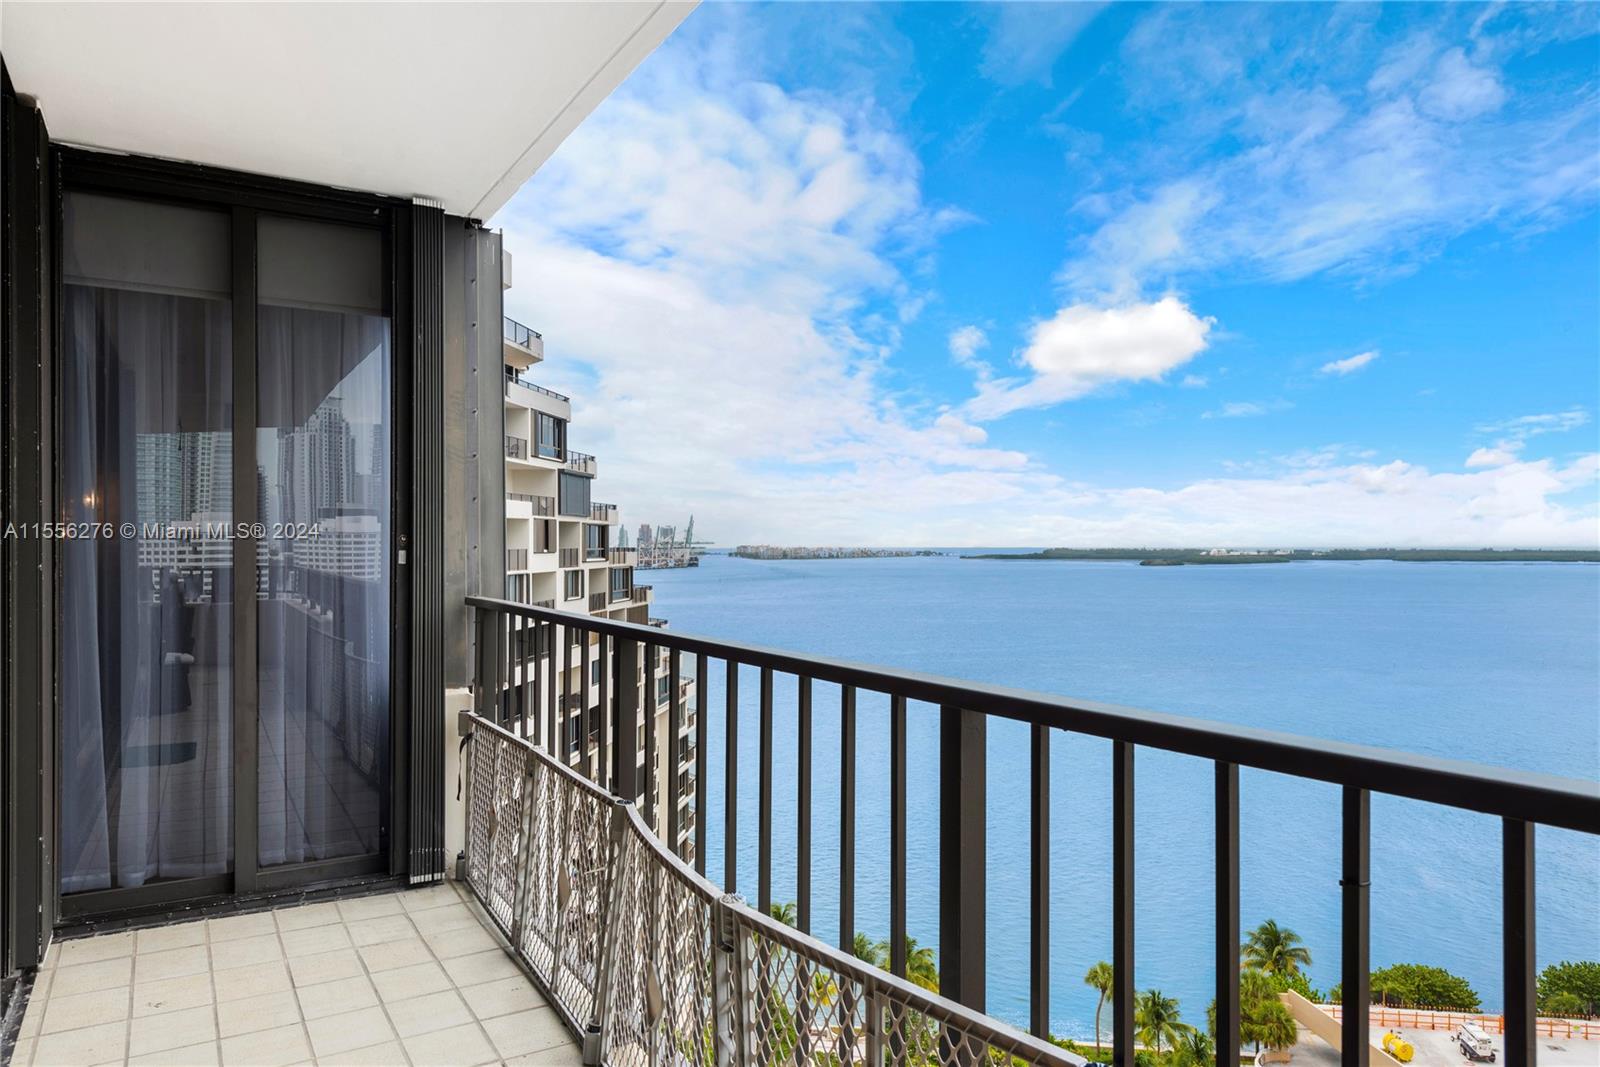 Stunning panoramic Biscayne Bay and Miami skyline views highlight this fully renovated 2-bed, 2.5-bath corner residence at Brickell Key One. This 1,577 square foot unit is open, spacious, and ideal for entertaining, with breathtaking views from the 18th-floor wrap-around balcony. A split-bedroom floor plan provides excellent privacy for residents, with balcony access from both bedrooms. Bedrooms include ample closets and blackout shades. The large customized master closet is an oversized walk-in with private access to the fully updated master bath. This is available for 6 months starting April 1st 2024.